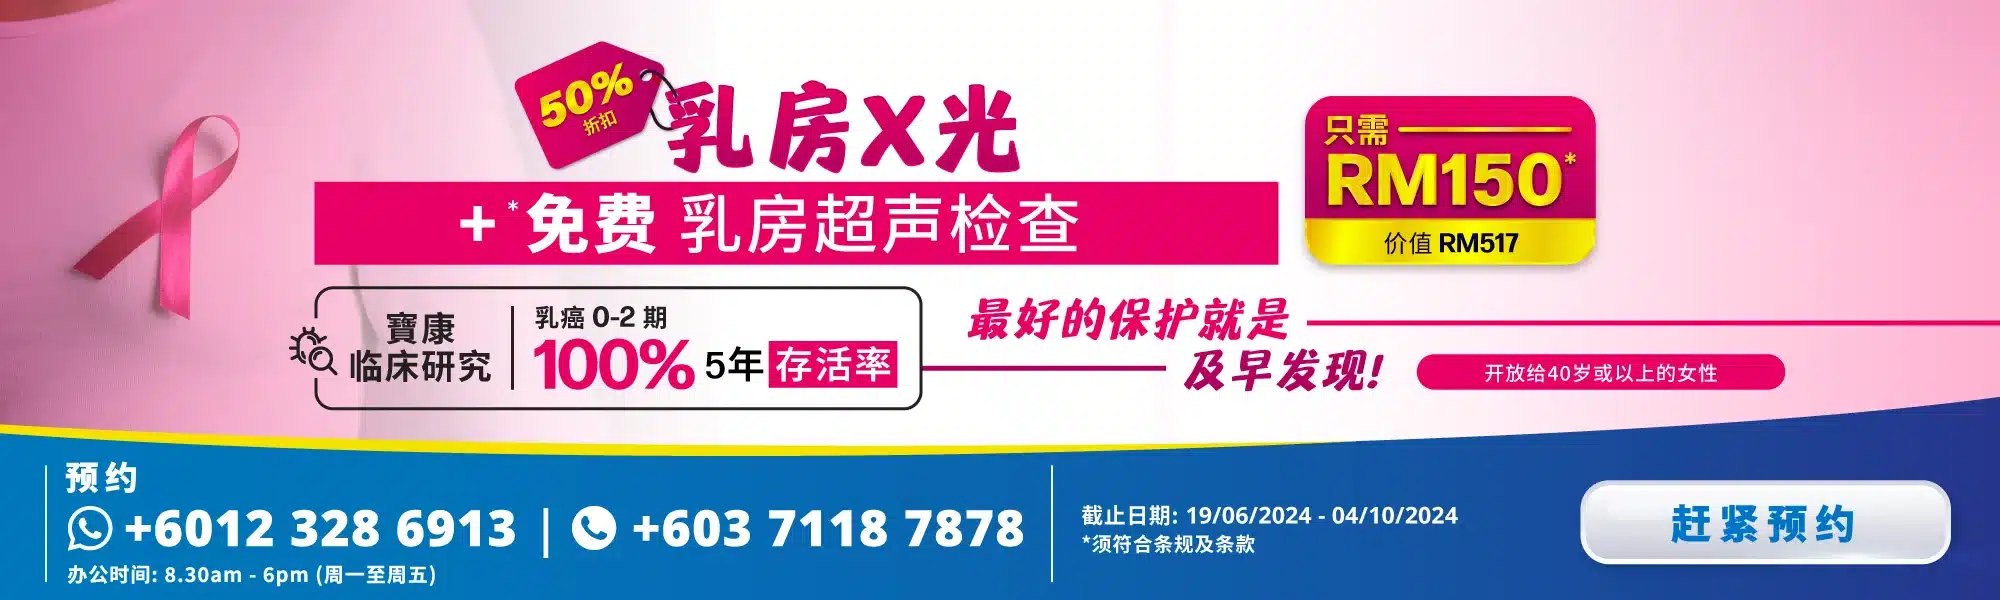 breast cancer screening promotion banner 2024, website banner, breast cancer screening zh website banner